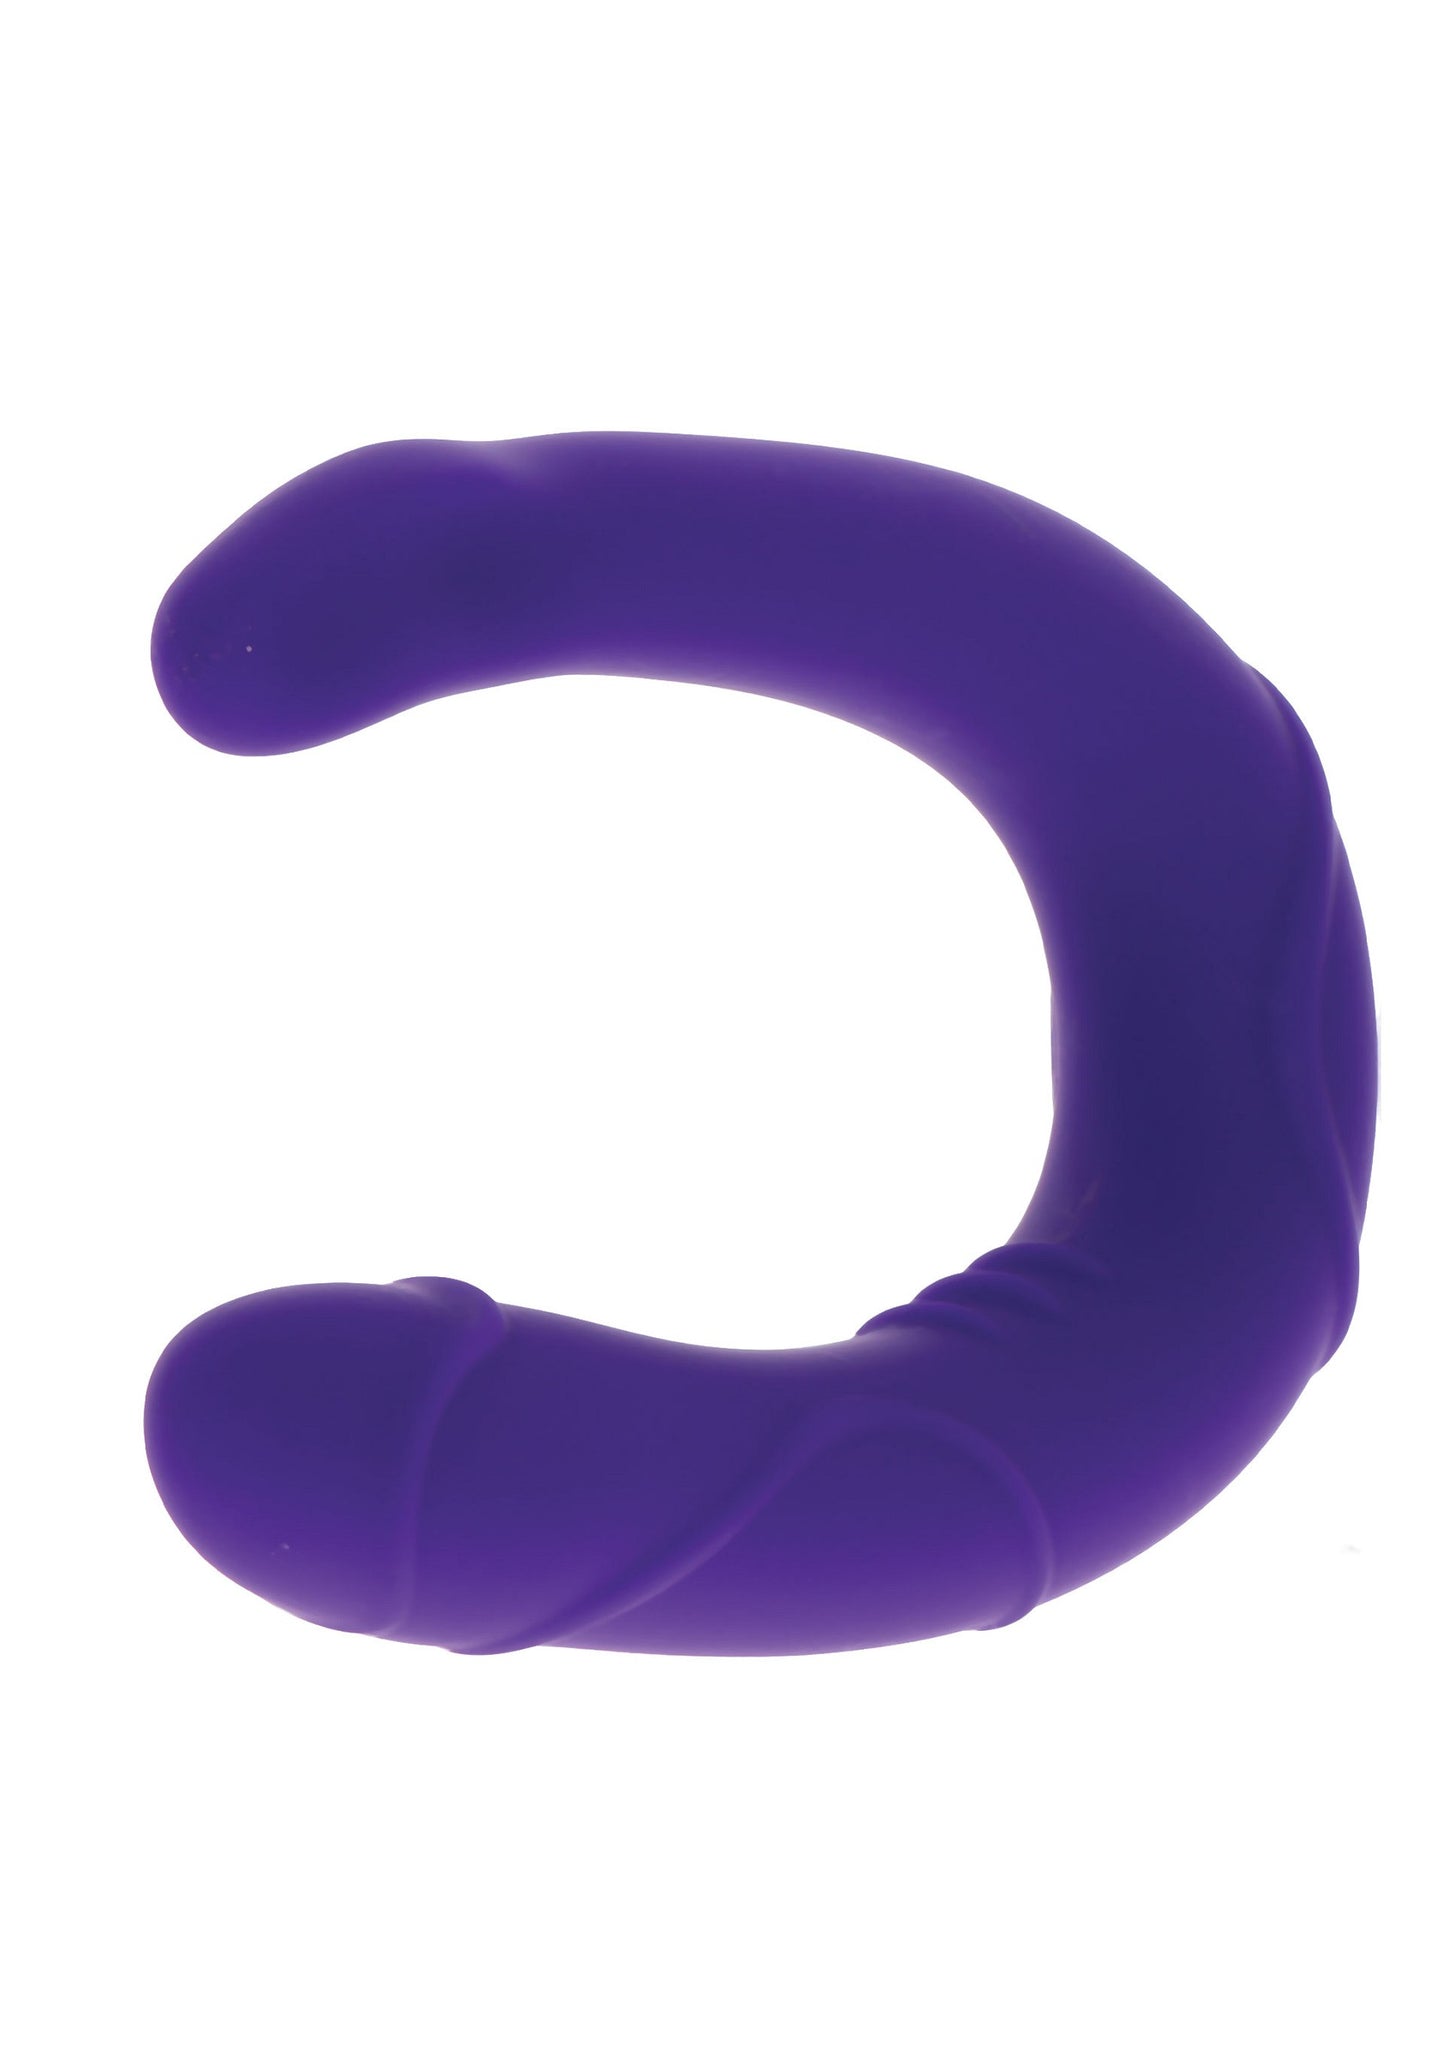 ToyJoy Get Real Vogue Mini Double Dong PURPLE - 7